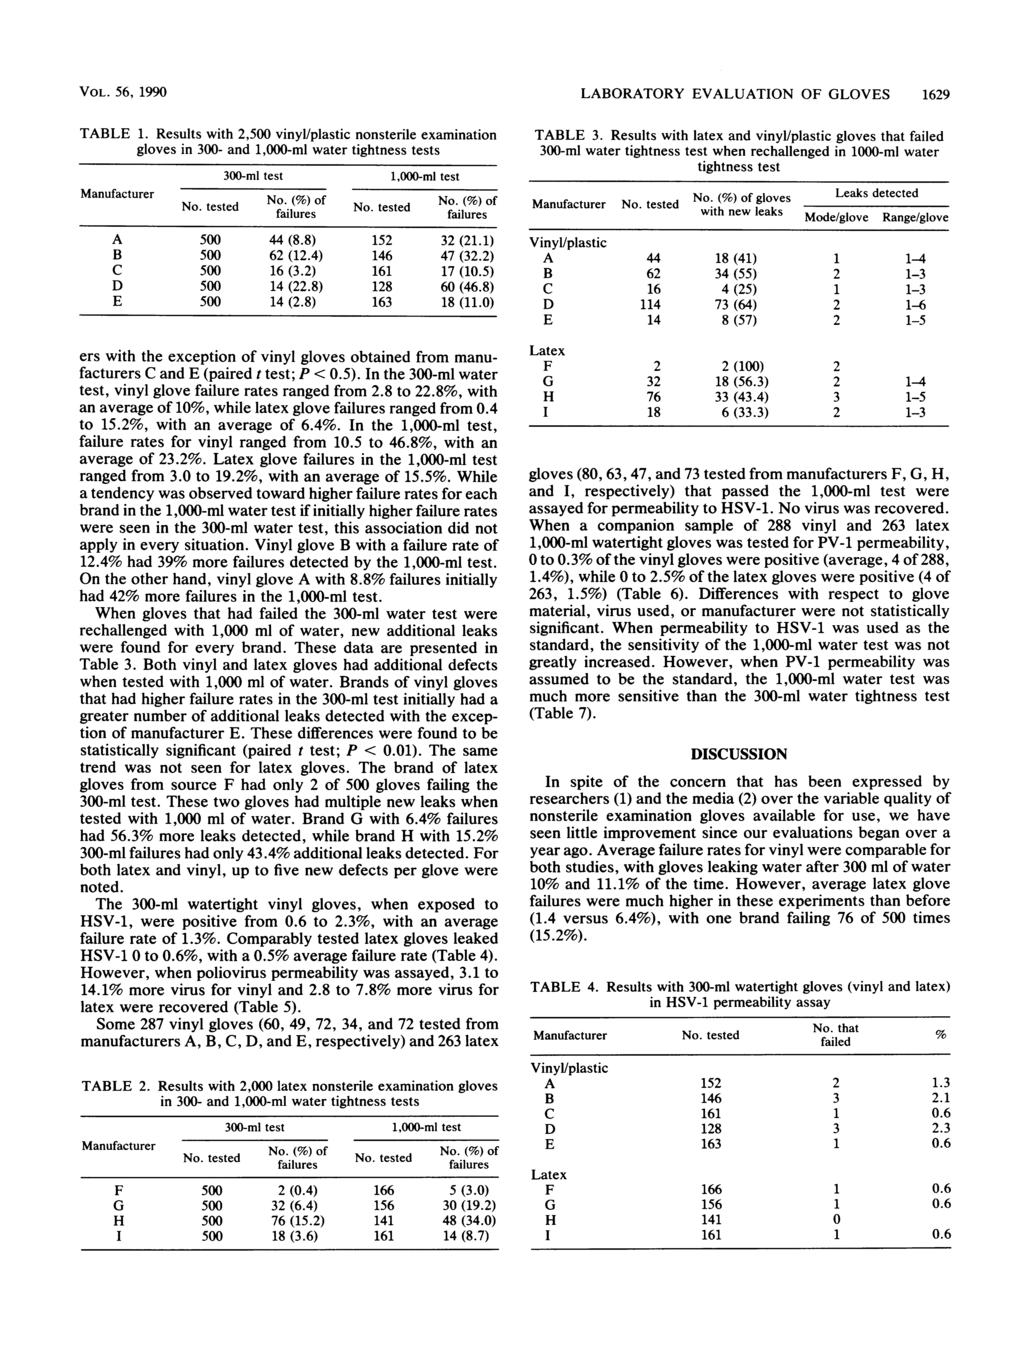 VOL. 56, 1990 TABLE 1. Results with 2,500 vinyl/plastic nonsterile examination gloves in 300- and 1,000-ml water tightness tests 300-ml test 1,000-ml test Manufacturer No. tested No. (%) of No.